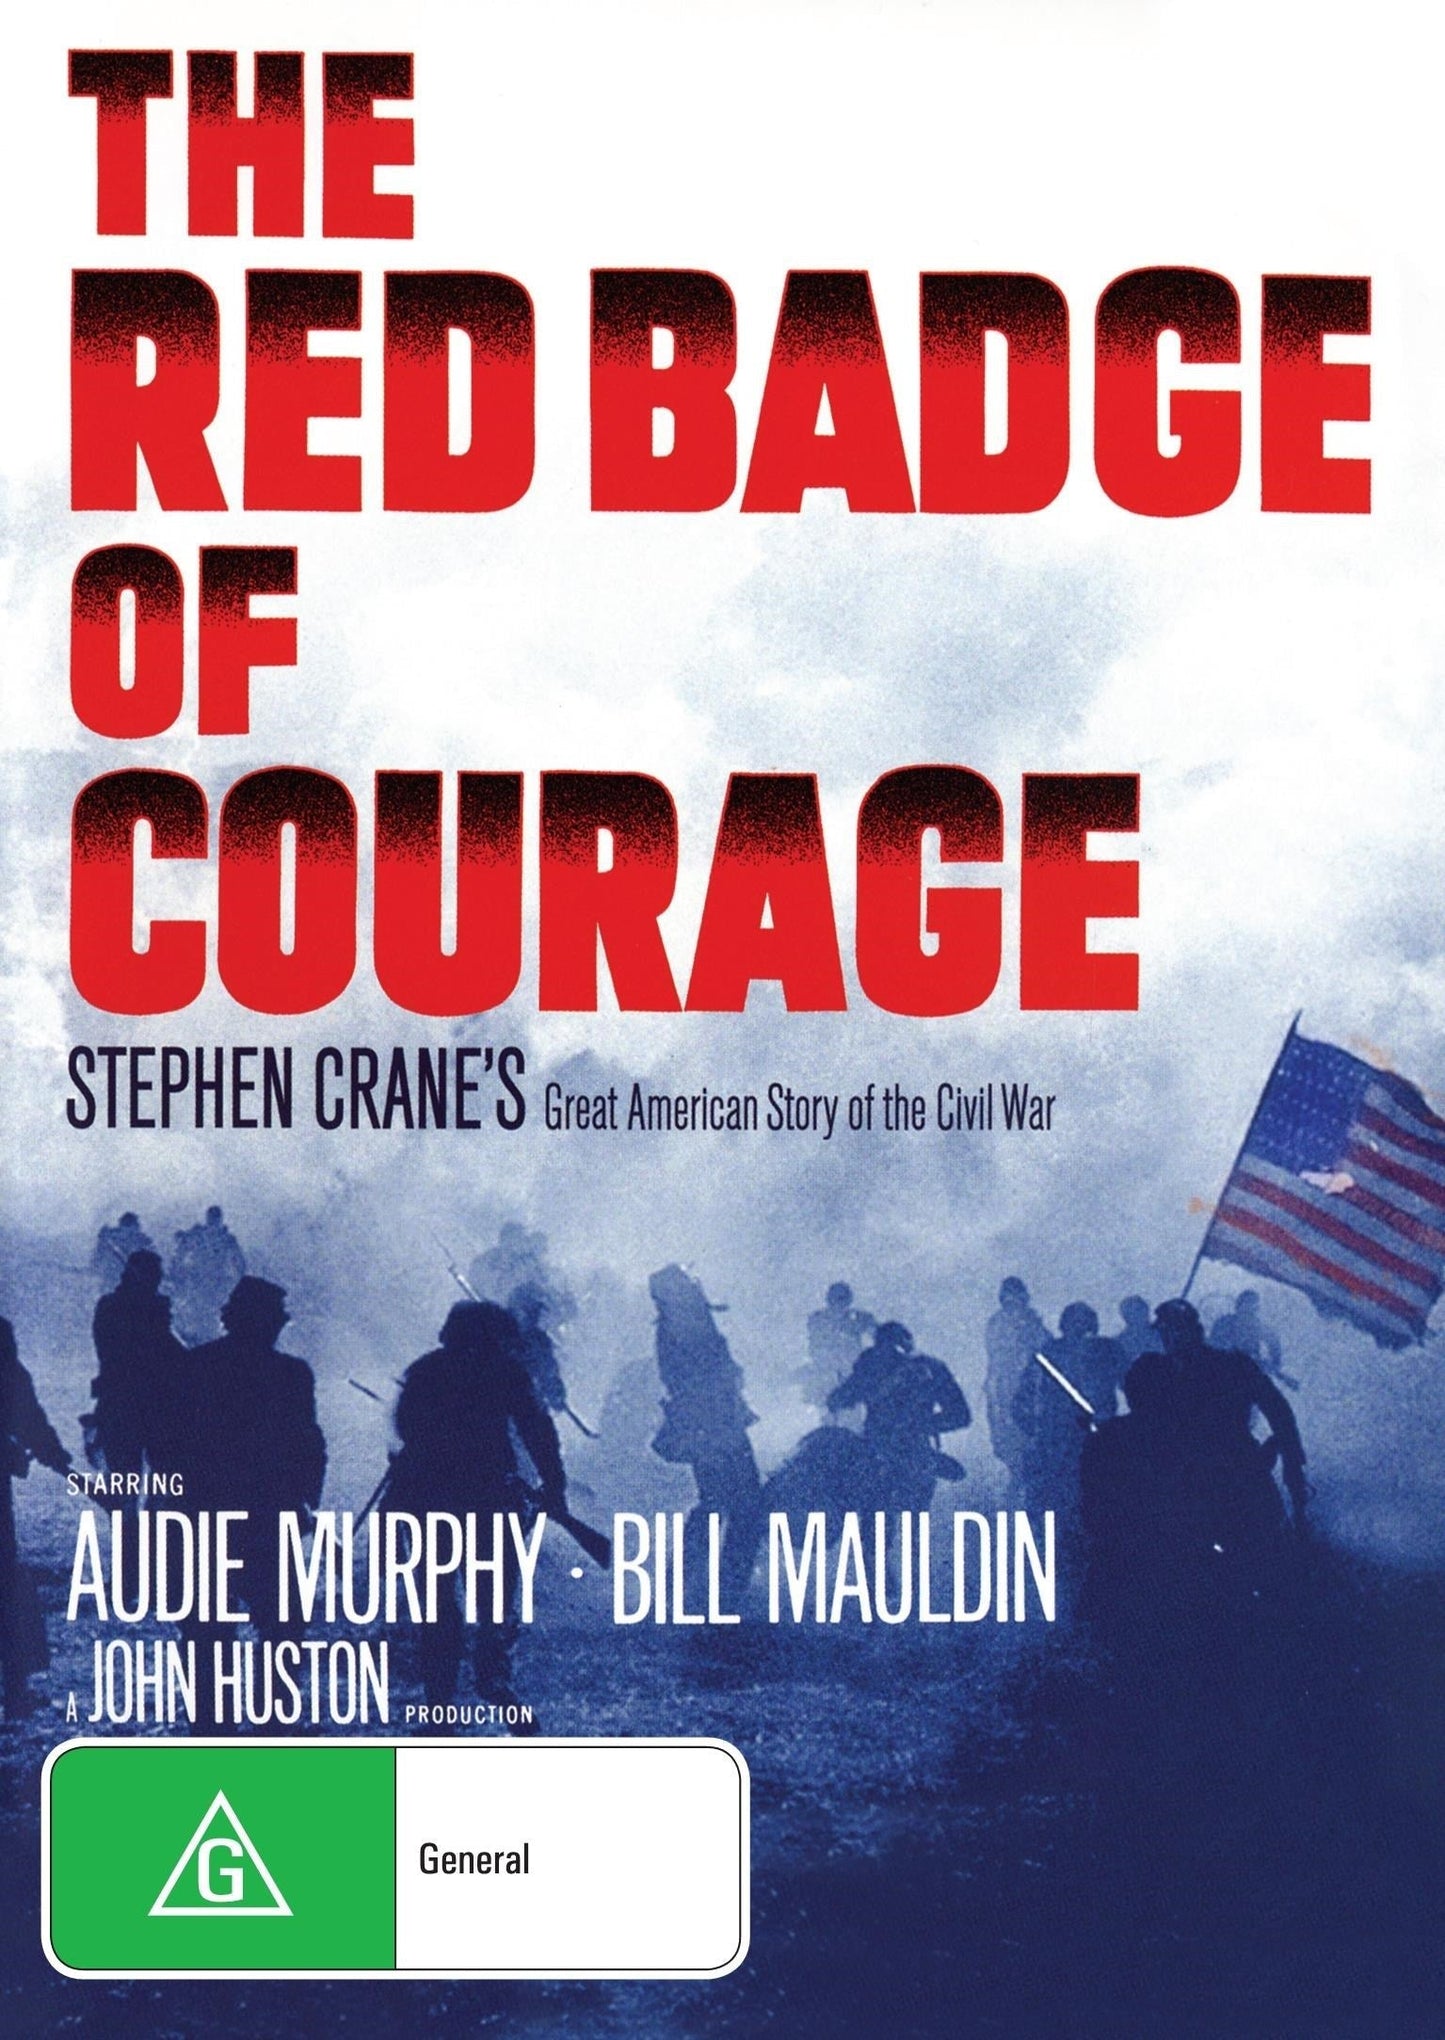 Red Badge Of Courage rareandcollectibledvds